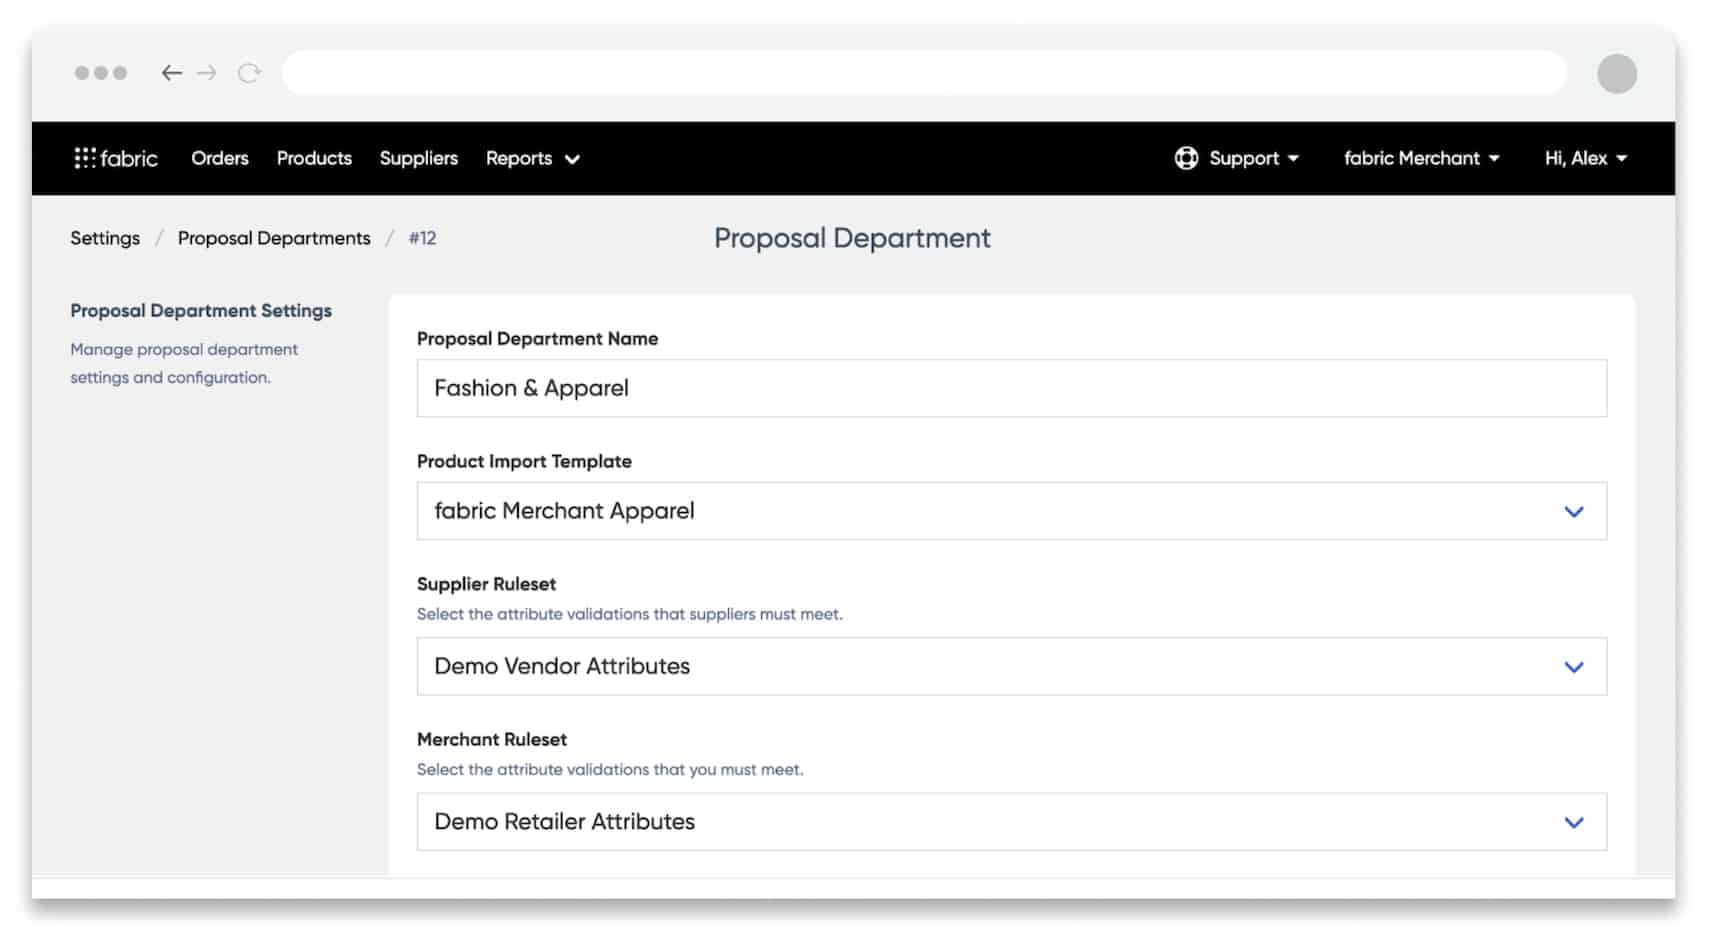 With our latest product update, merchants can create a proposal department in fabric Marketplace.